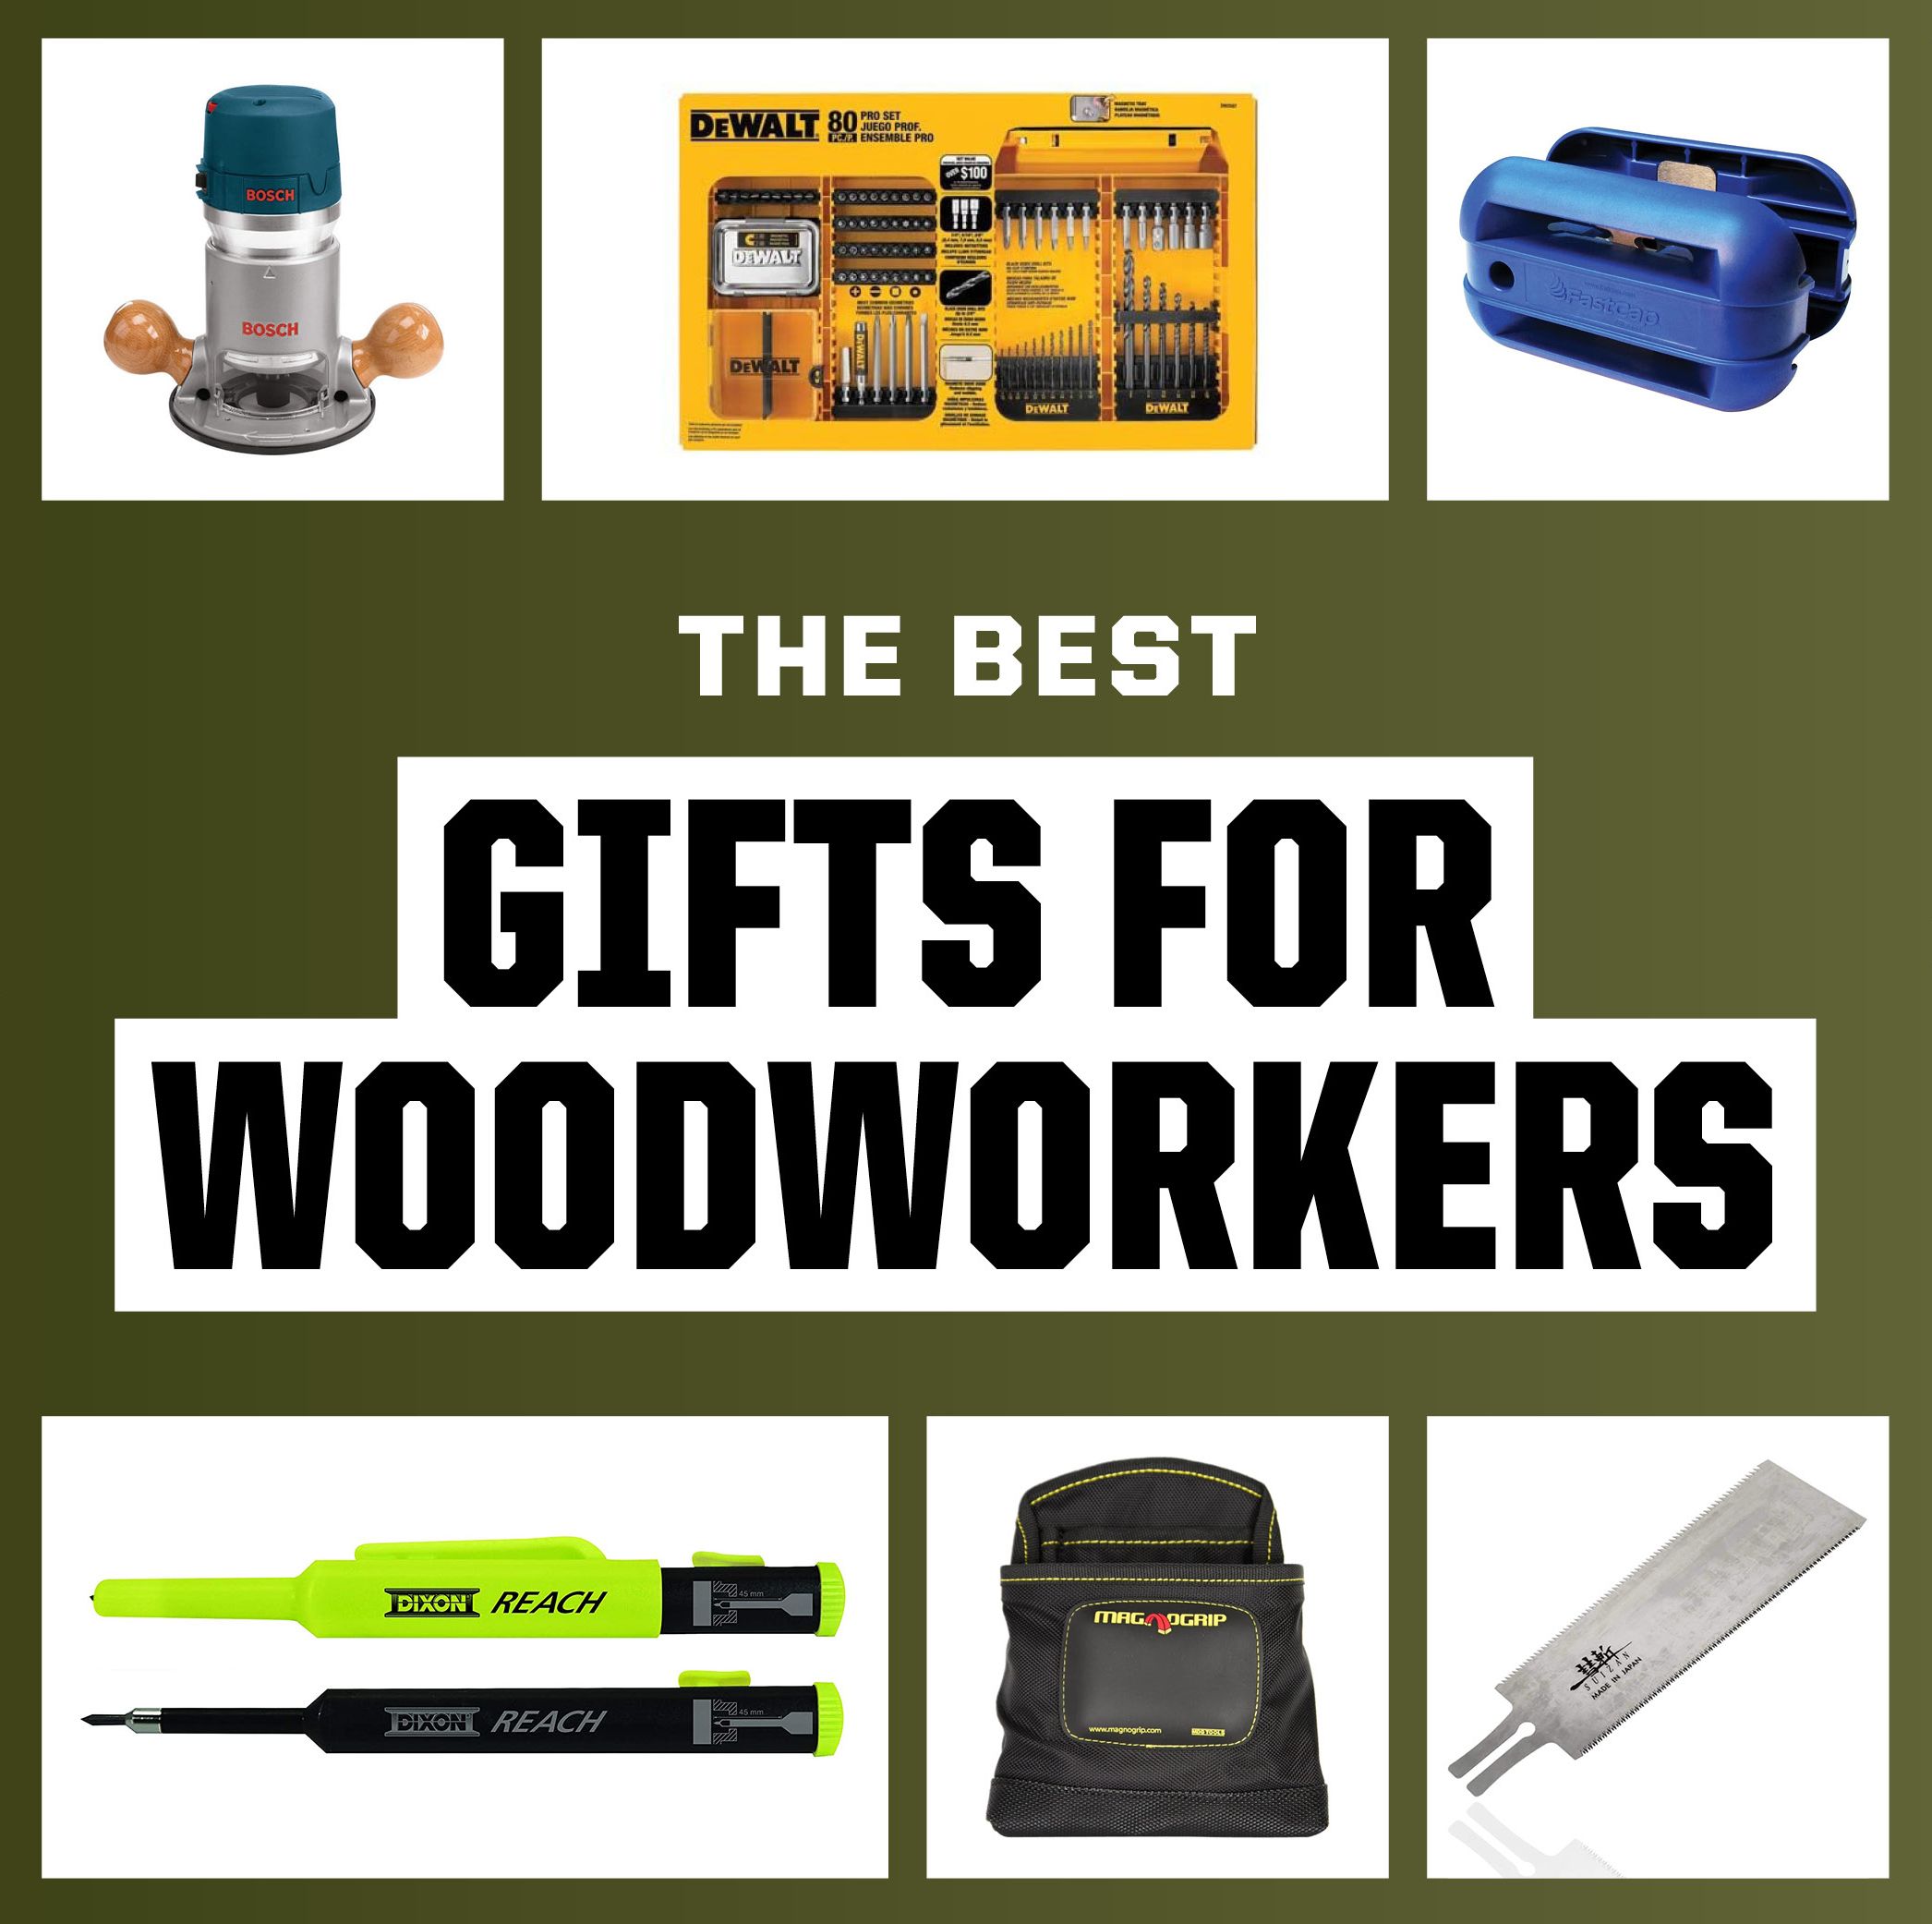 The Best Gifts for Woodworkers and Carpenters